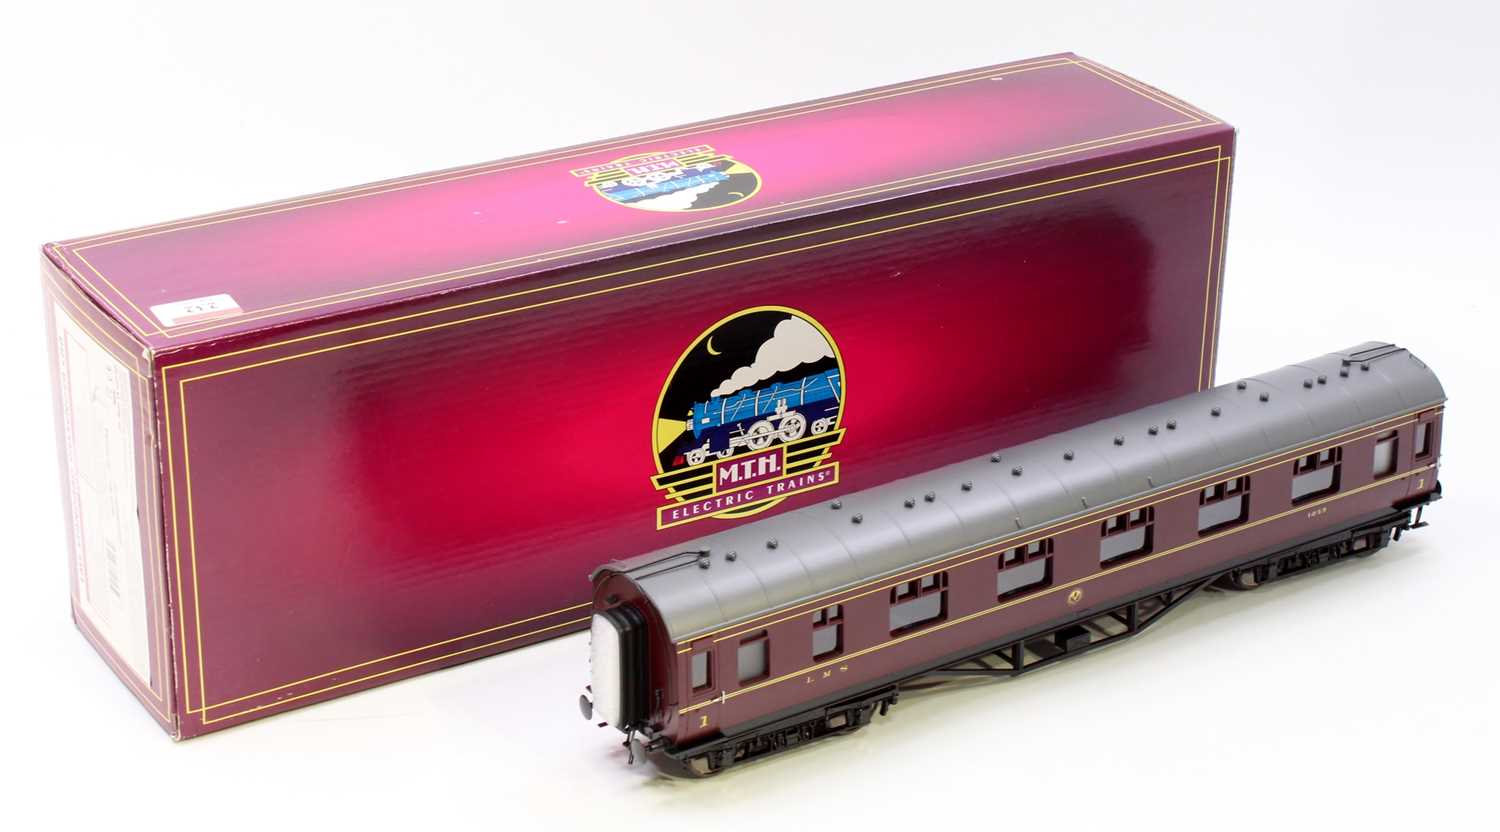 Item no. 22-60064 MTH LMS Stanier passenger coach 1st class no.1059, complete with interior